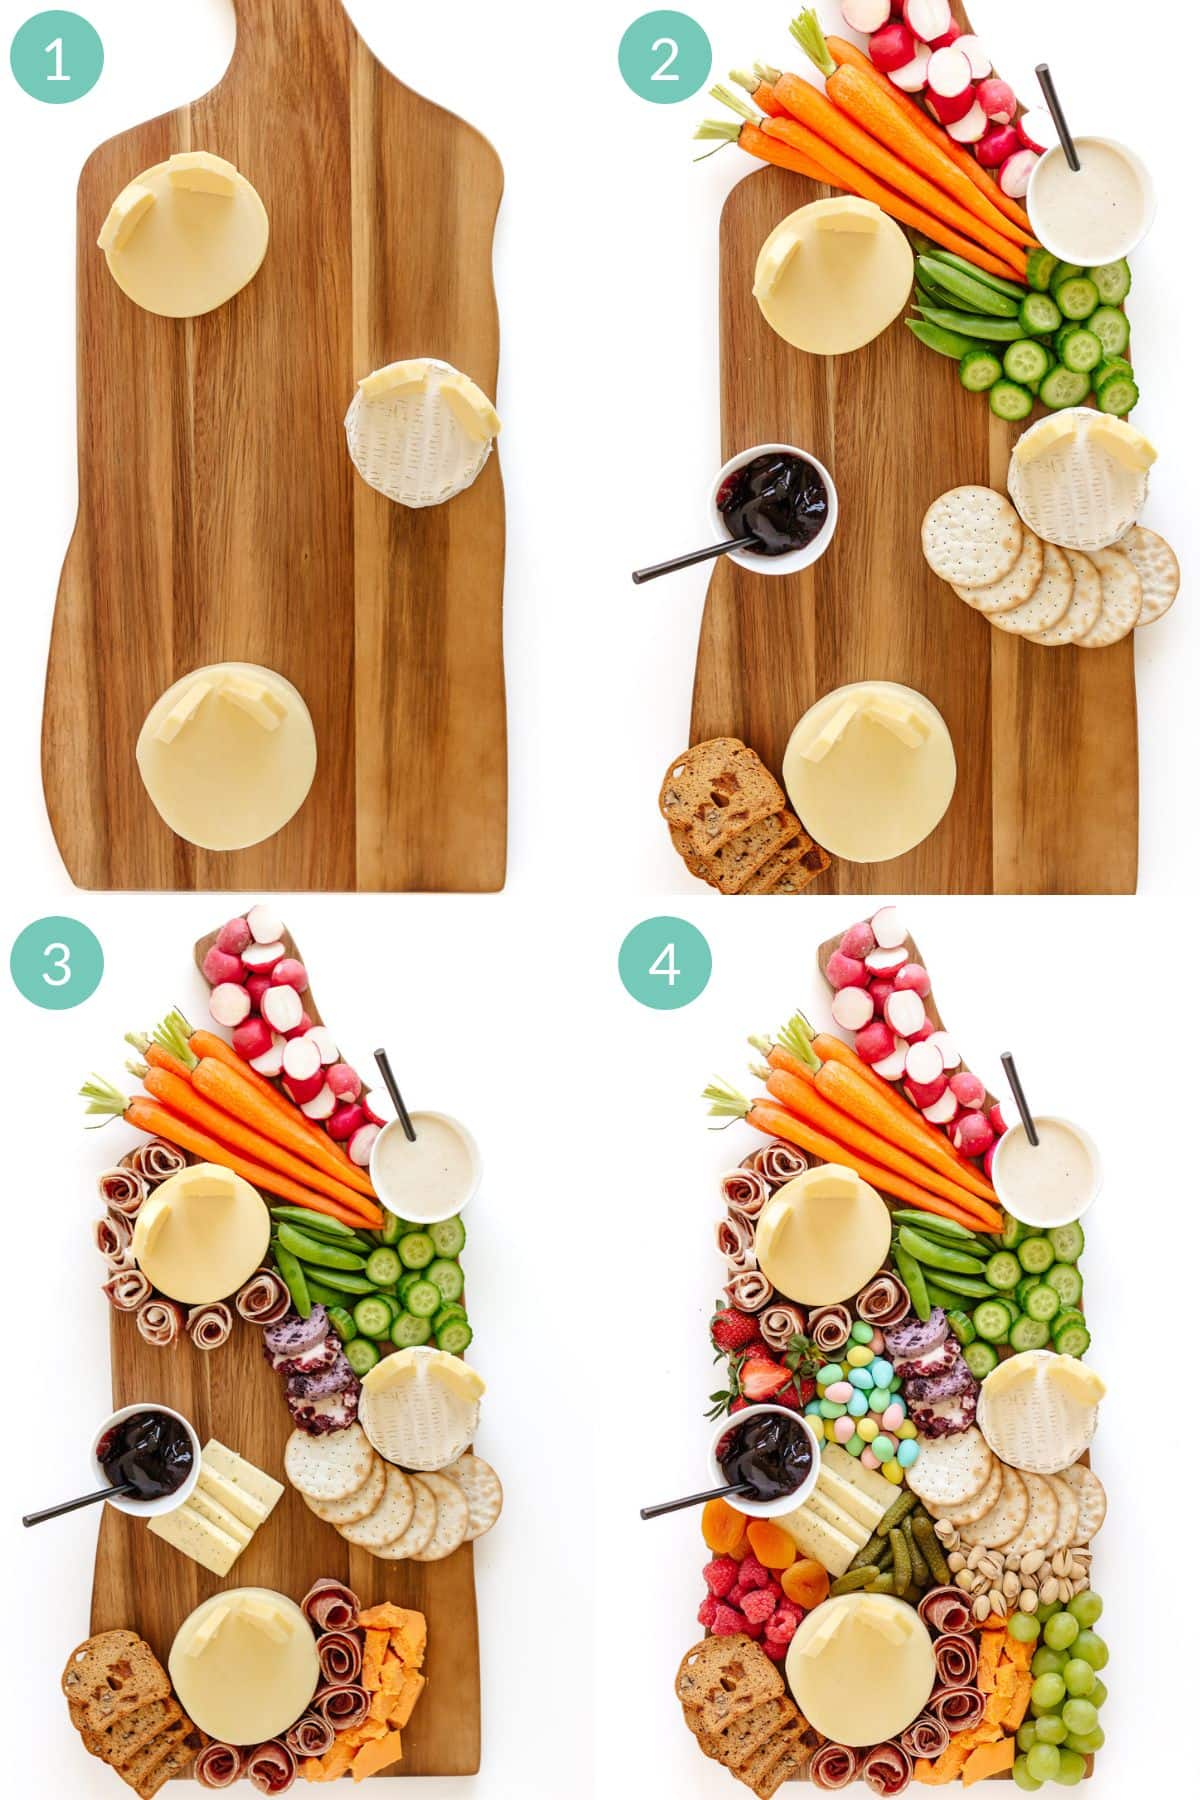 Numbered photo collage showing how to assemble a bunny charcuterie board.